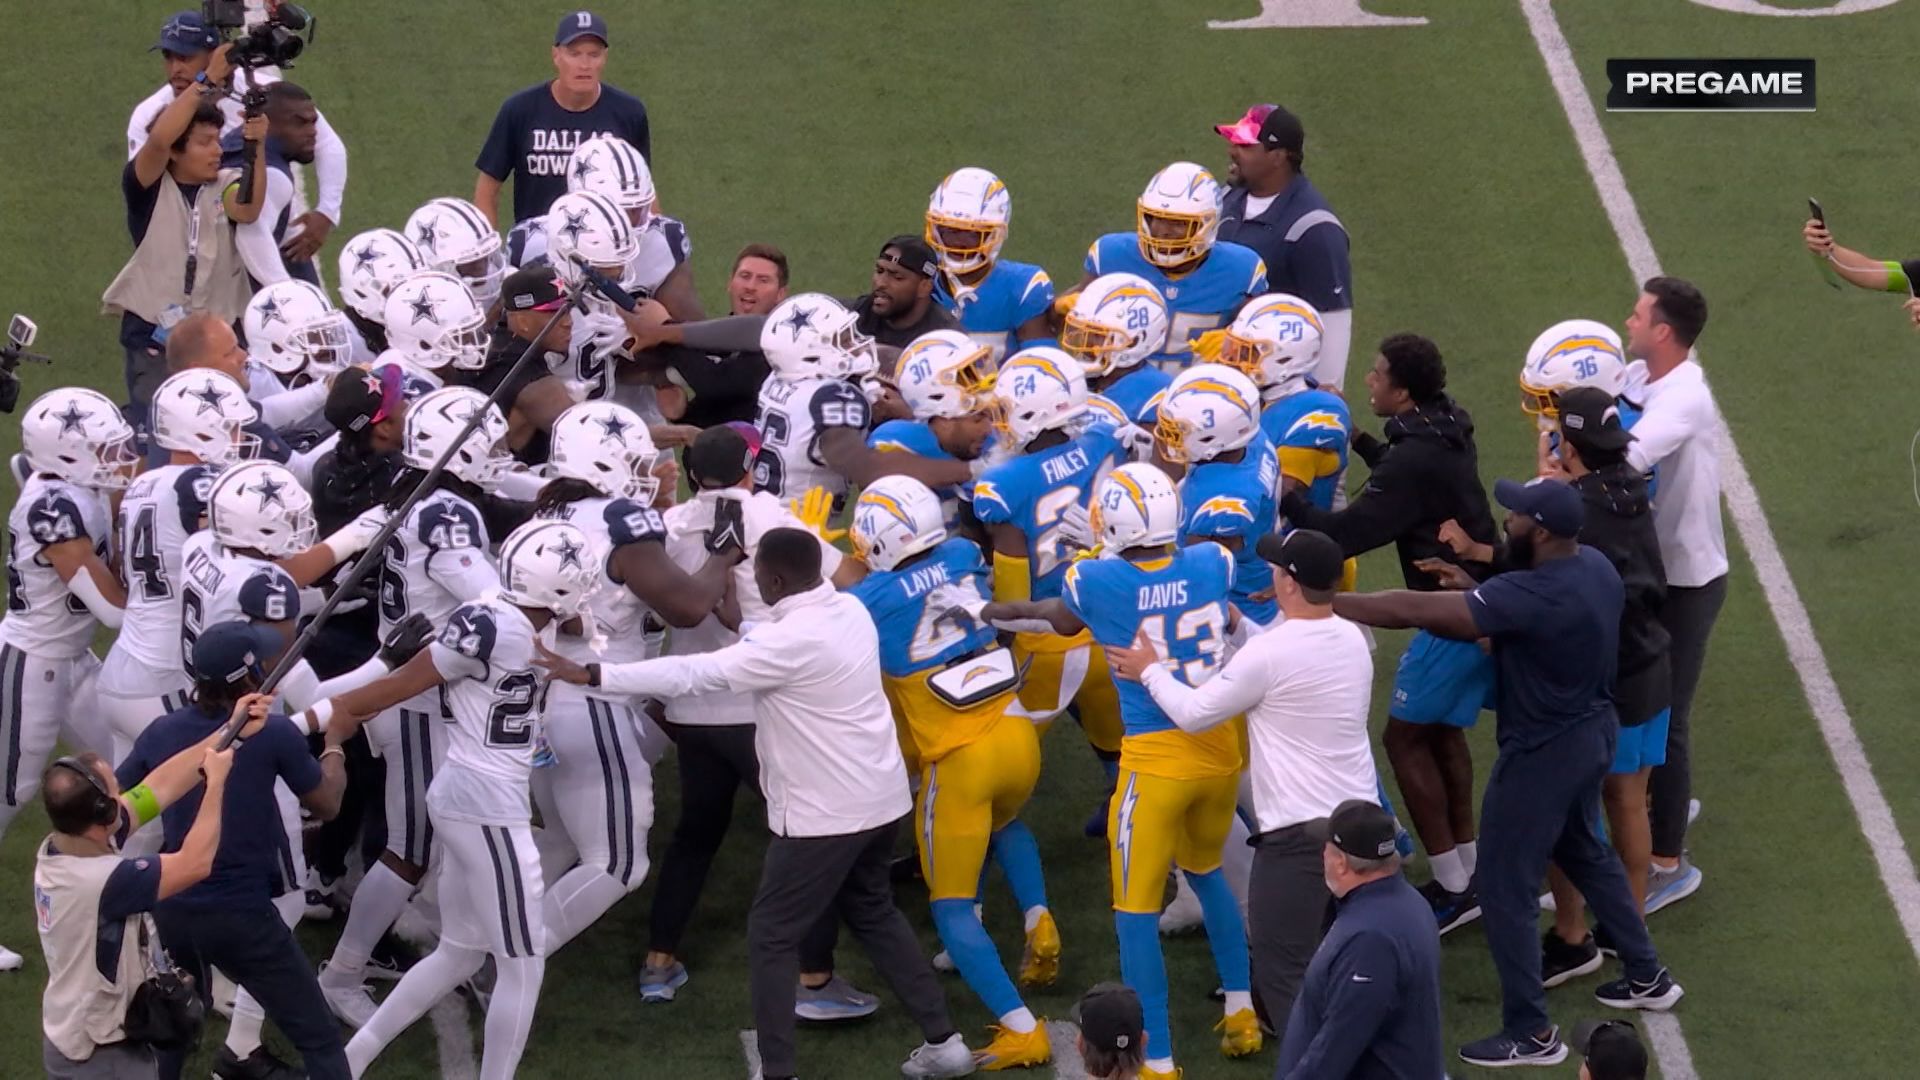 Mass brawl breaks out between Cowboys and Chargers pre-game